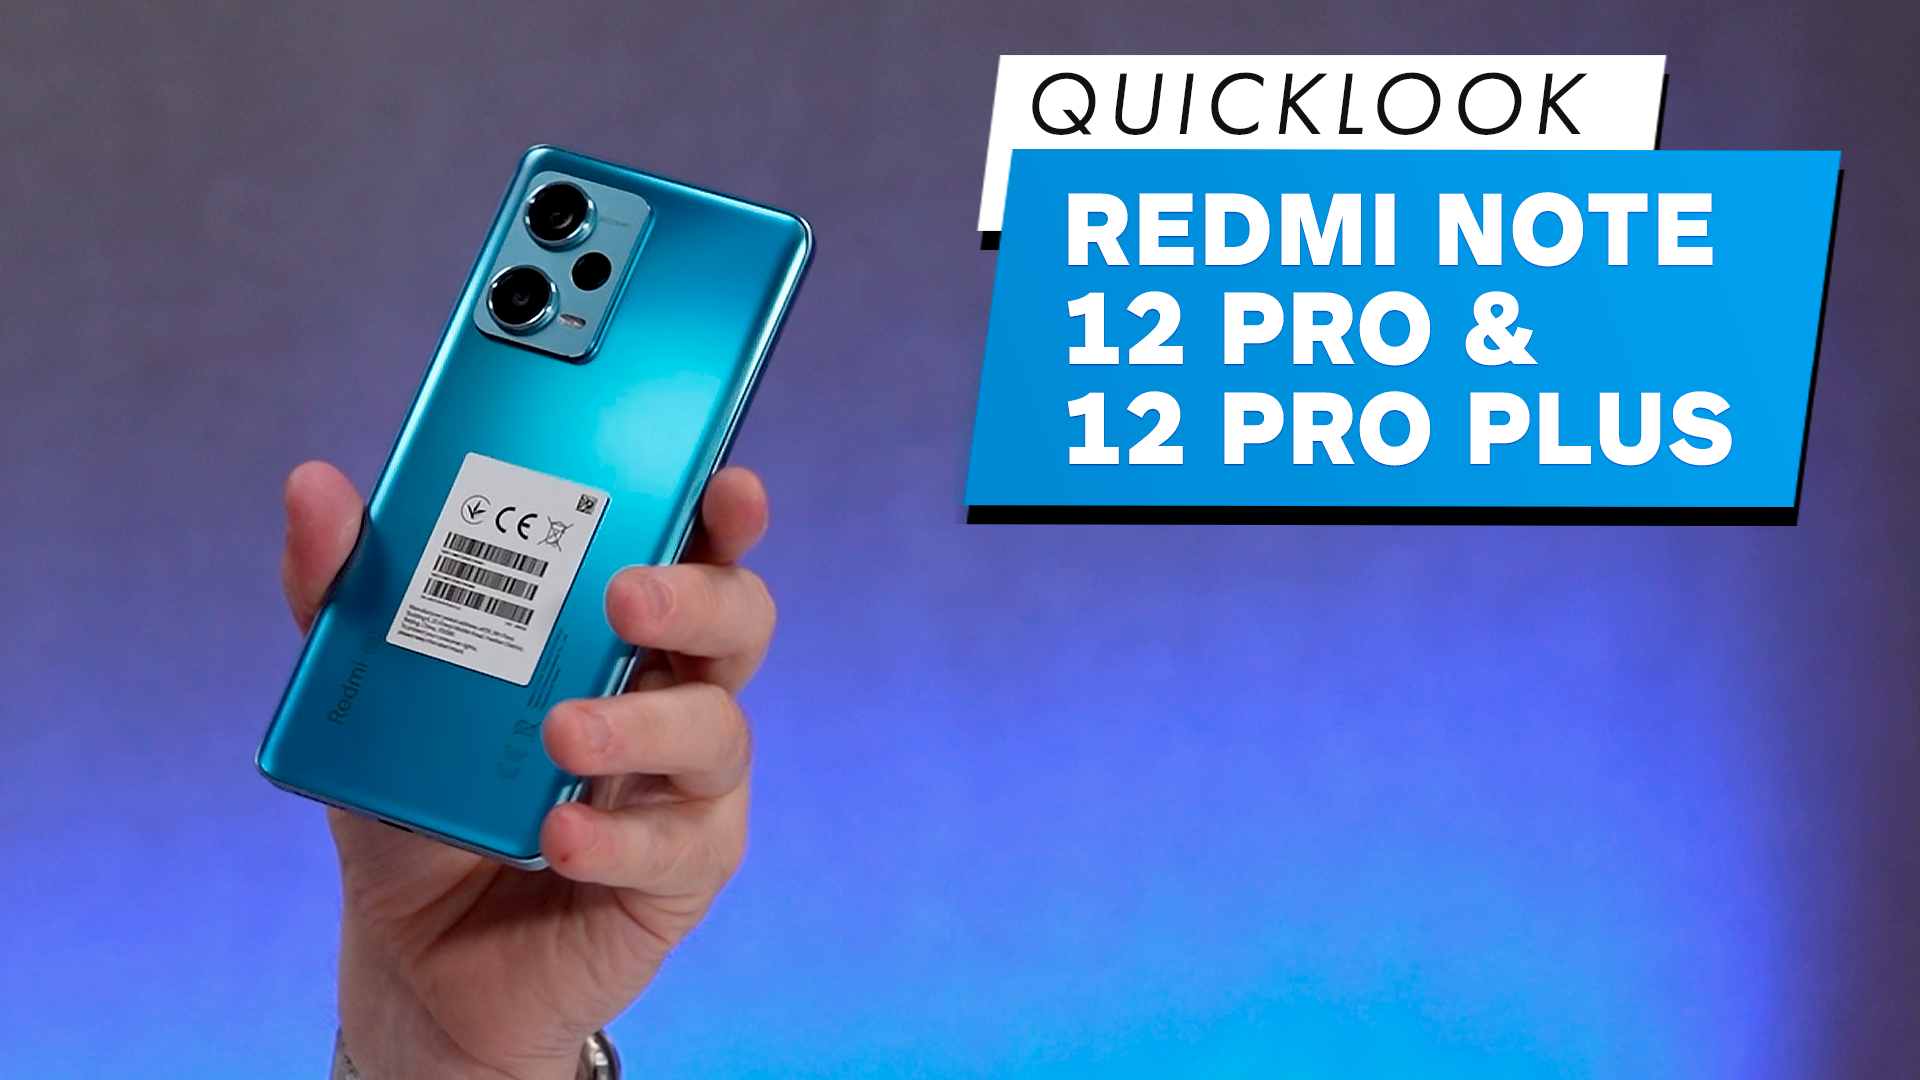 The Redmi Note 12 Pro aims to be an affordable flagship mobile for everyone